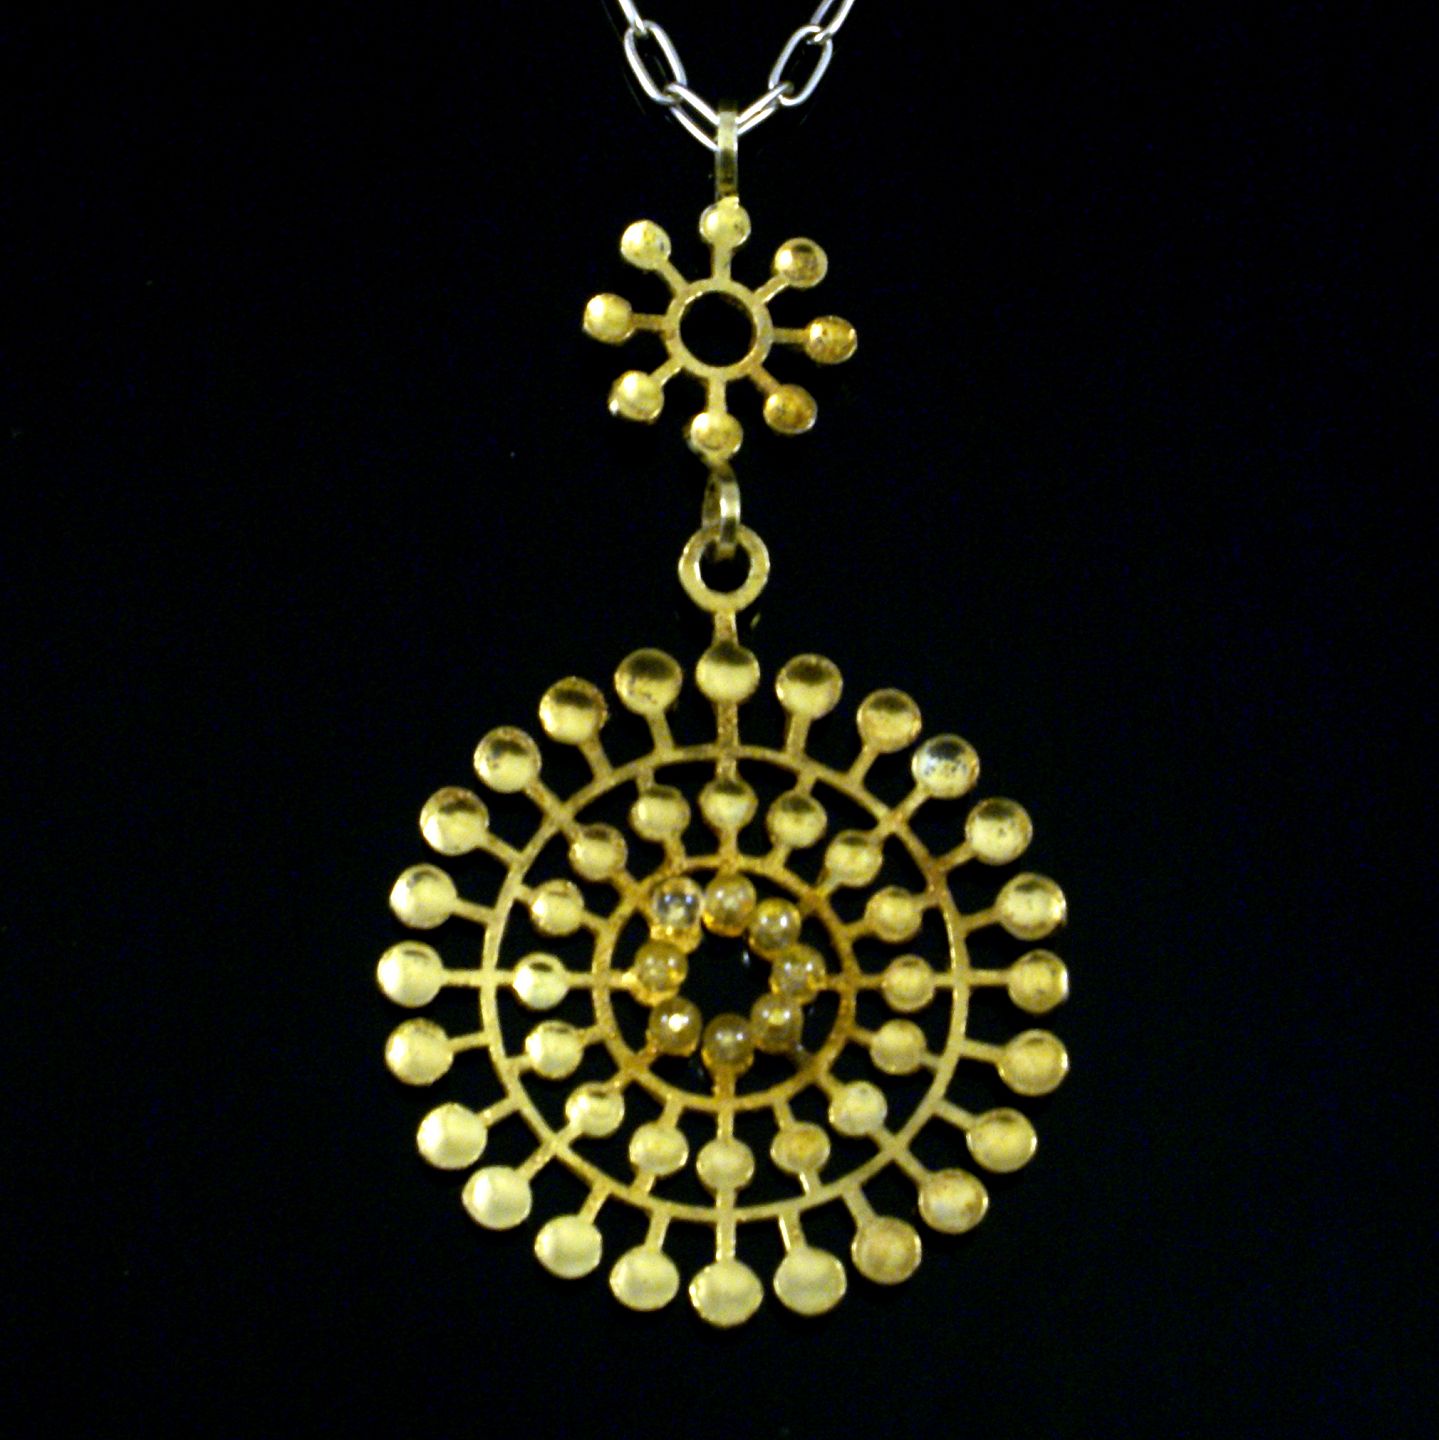 WorldAntique.net - Bent Exner (1932-2006). Sterling Silver Pendant Necklace with small acrylic glass balls.